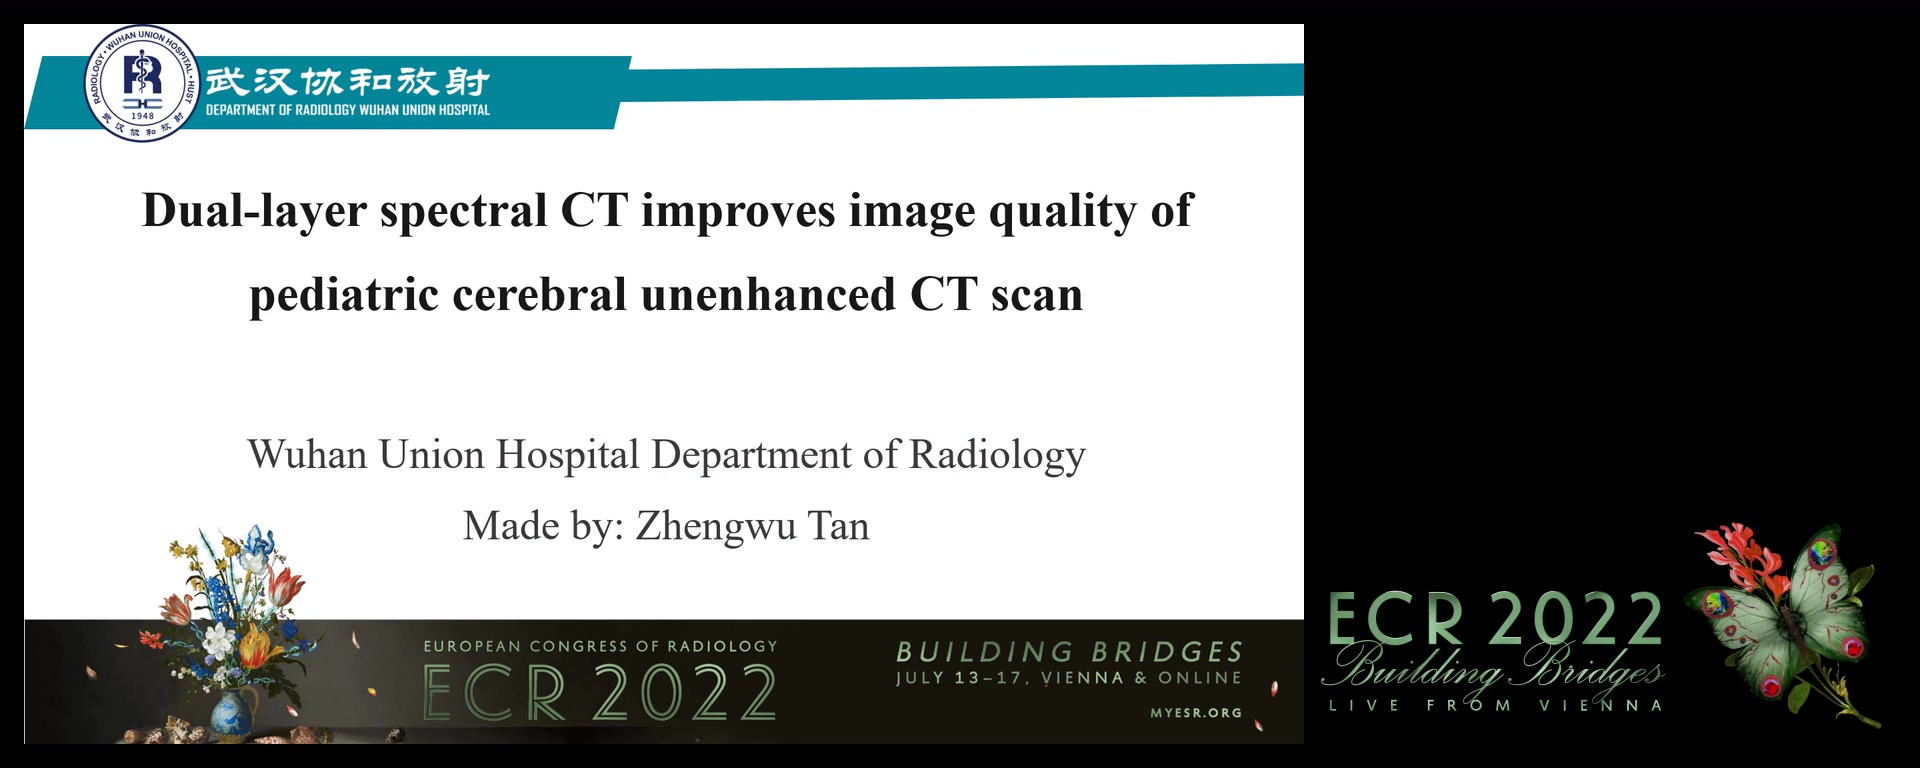 Dual-layer spectral CT improves image quality of paediatric cerebral unenhanced CT scan - Jing Wang, Wuhan / CN